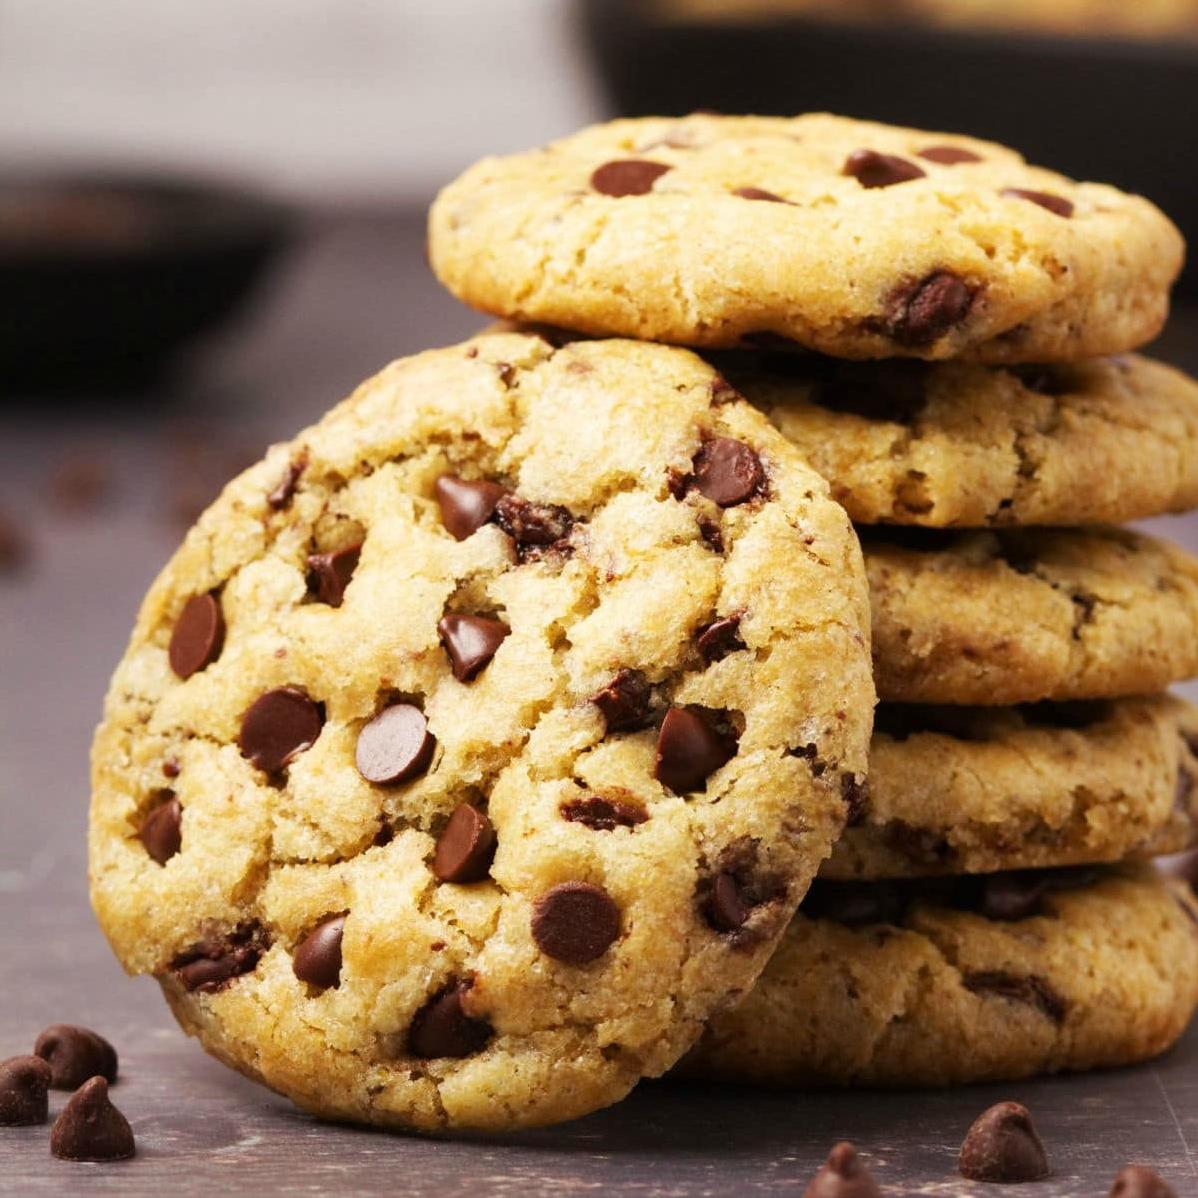  You don't have to sacrifice taste to be vegan with these scrumptious wheat-free cookies.